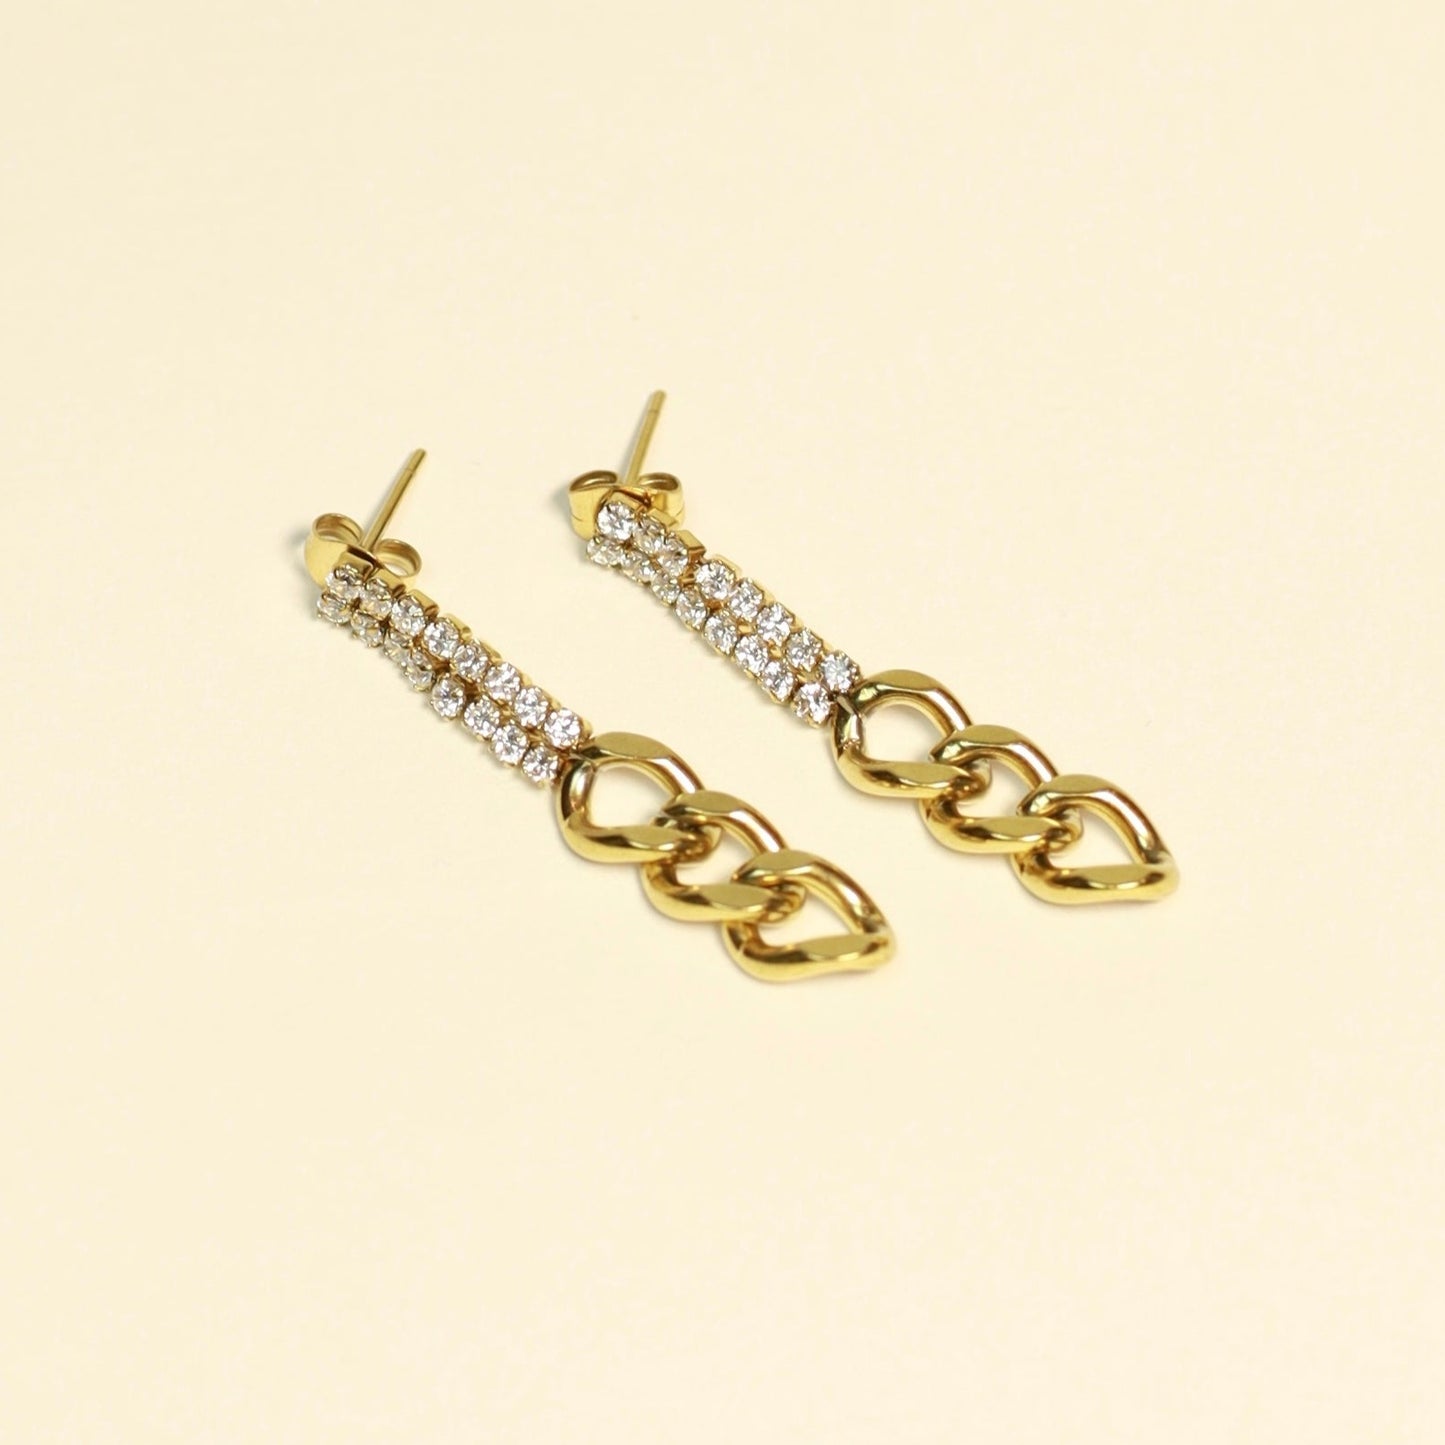 Long crystal and chain earrings